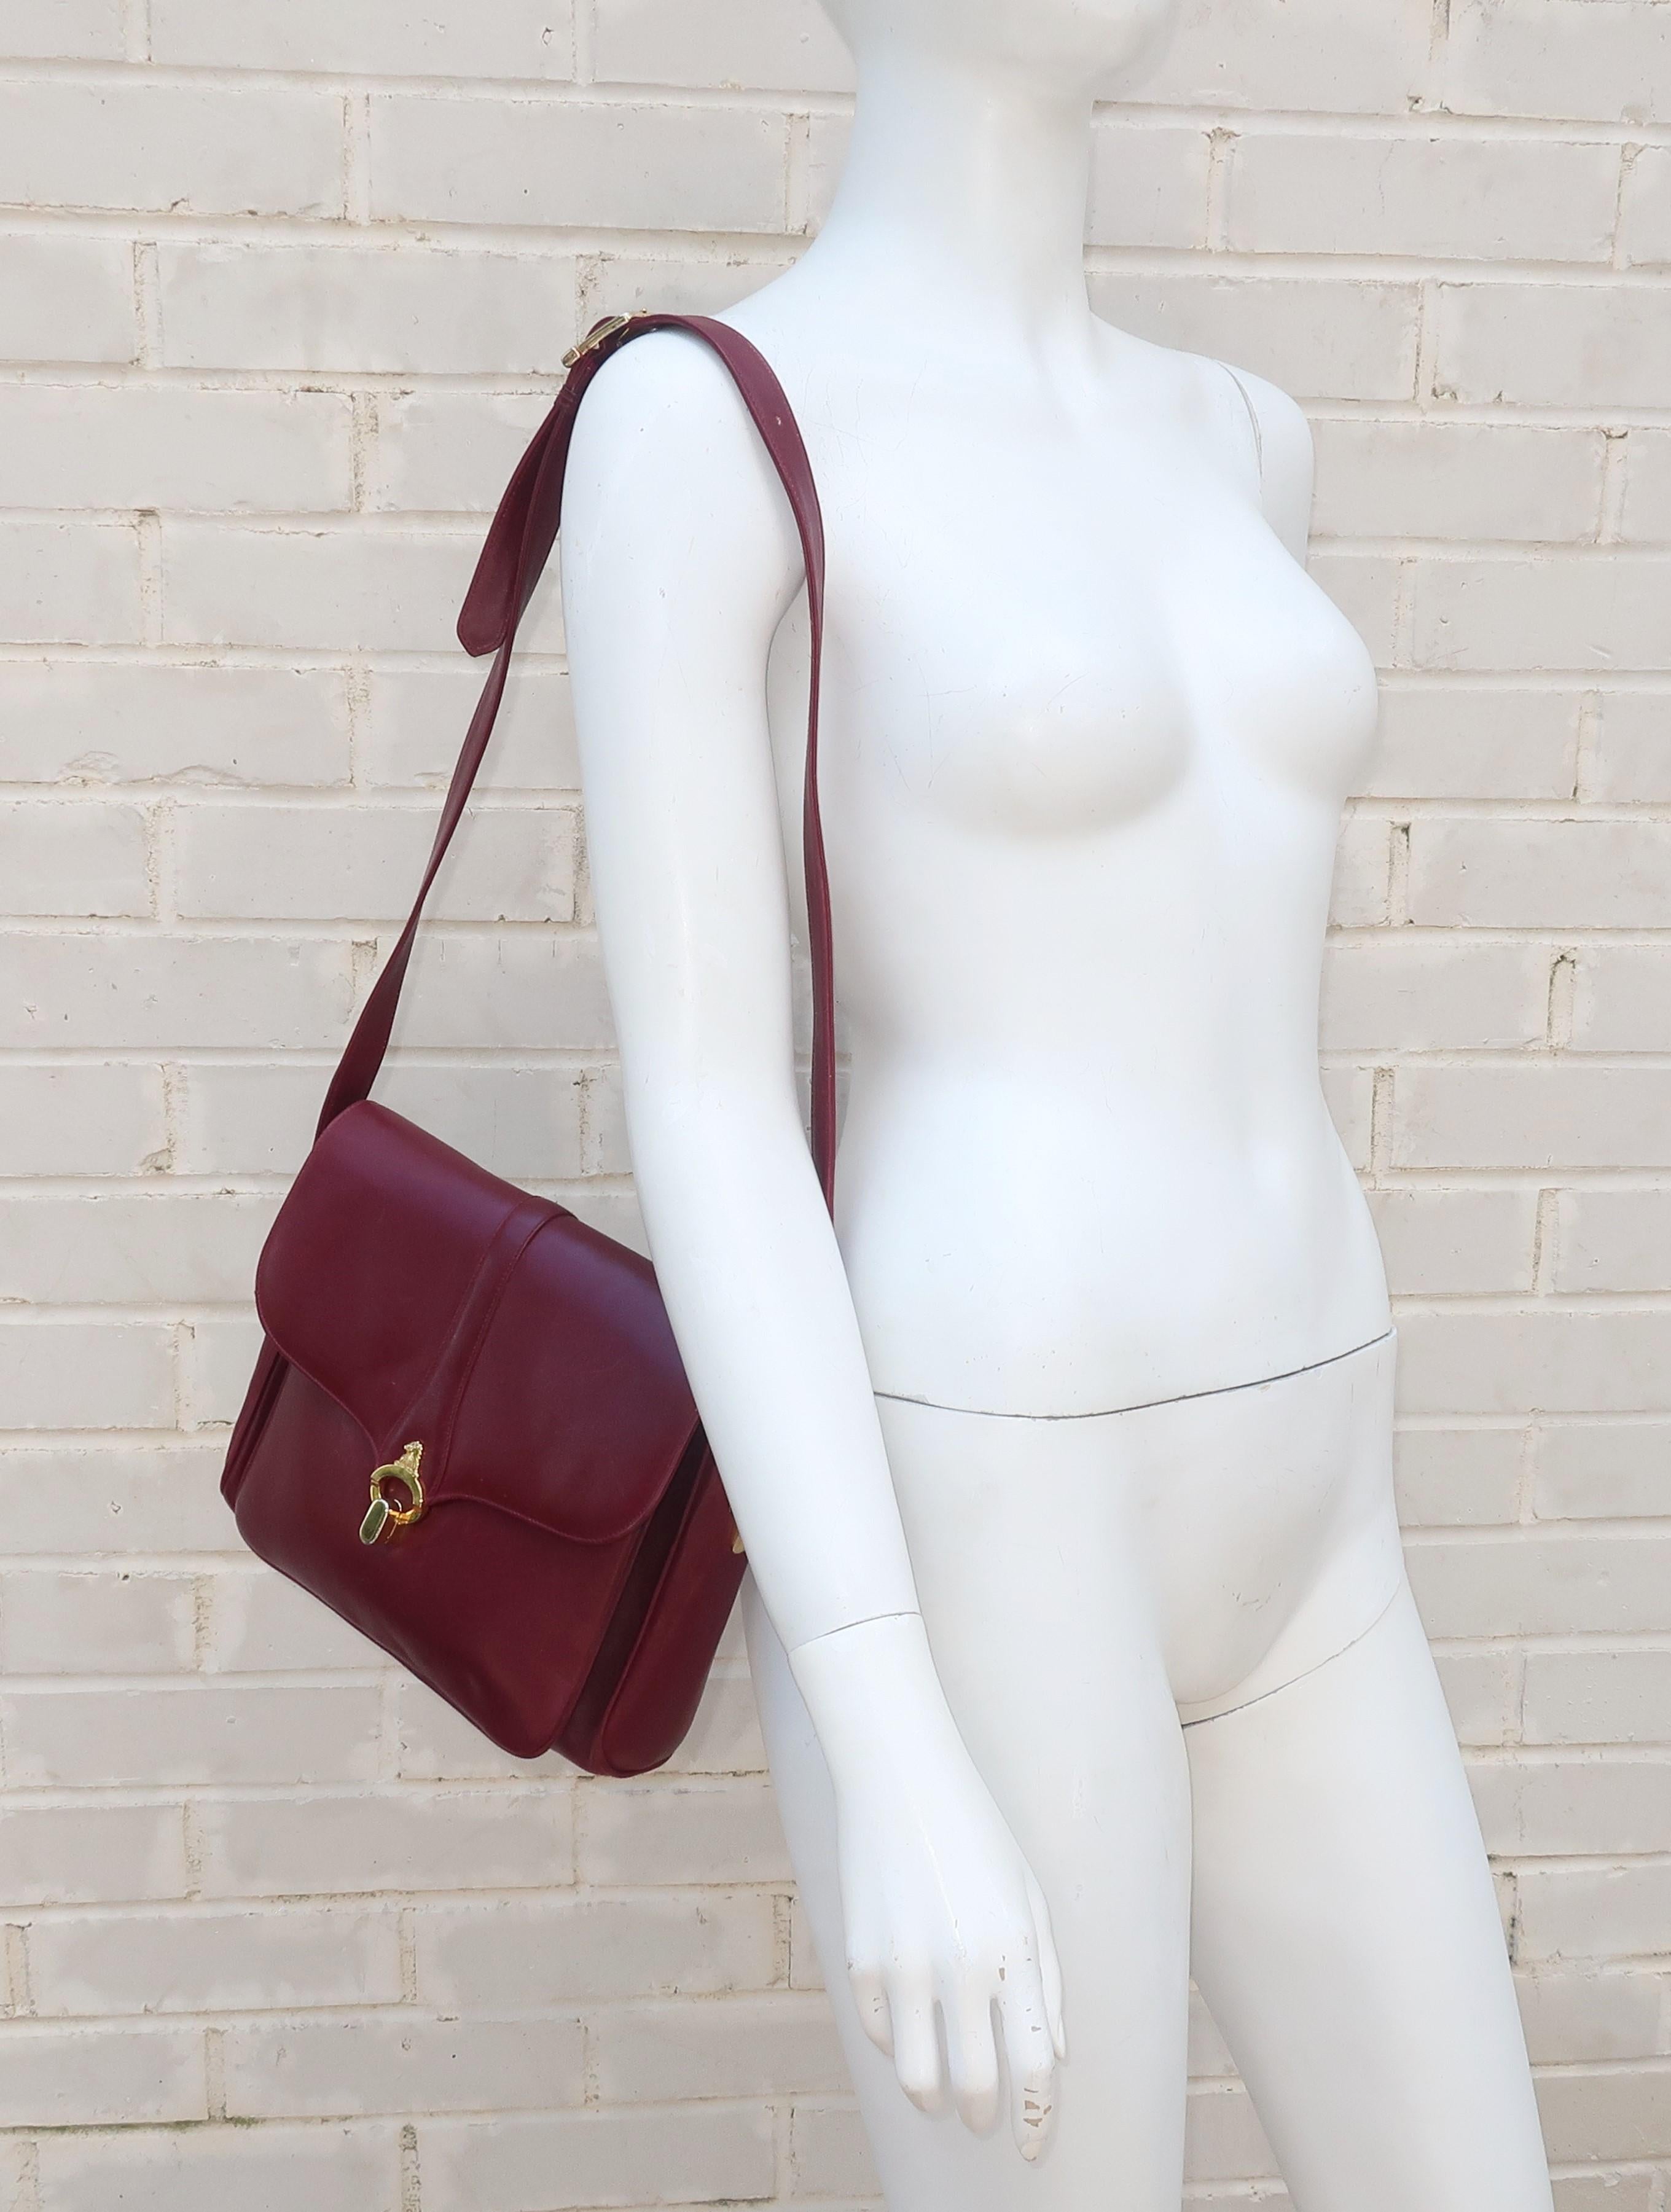 Mark Cross was founded in 1845 to create the finest leather goods for the horse and buggy rider and indeed much of the fashionable merchandise produced in the 1900's had the aesthetic of equestrian leathers.  This 1970's burgundy leather shoulder